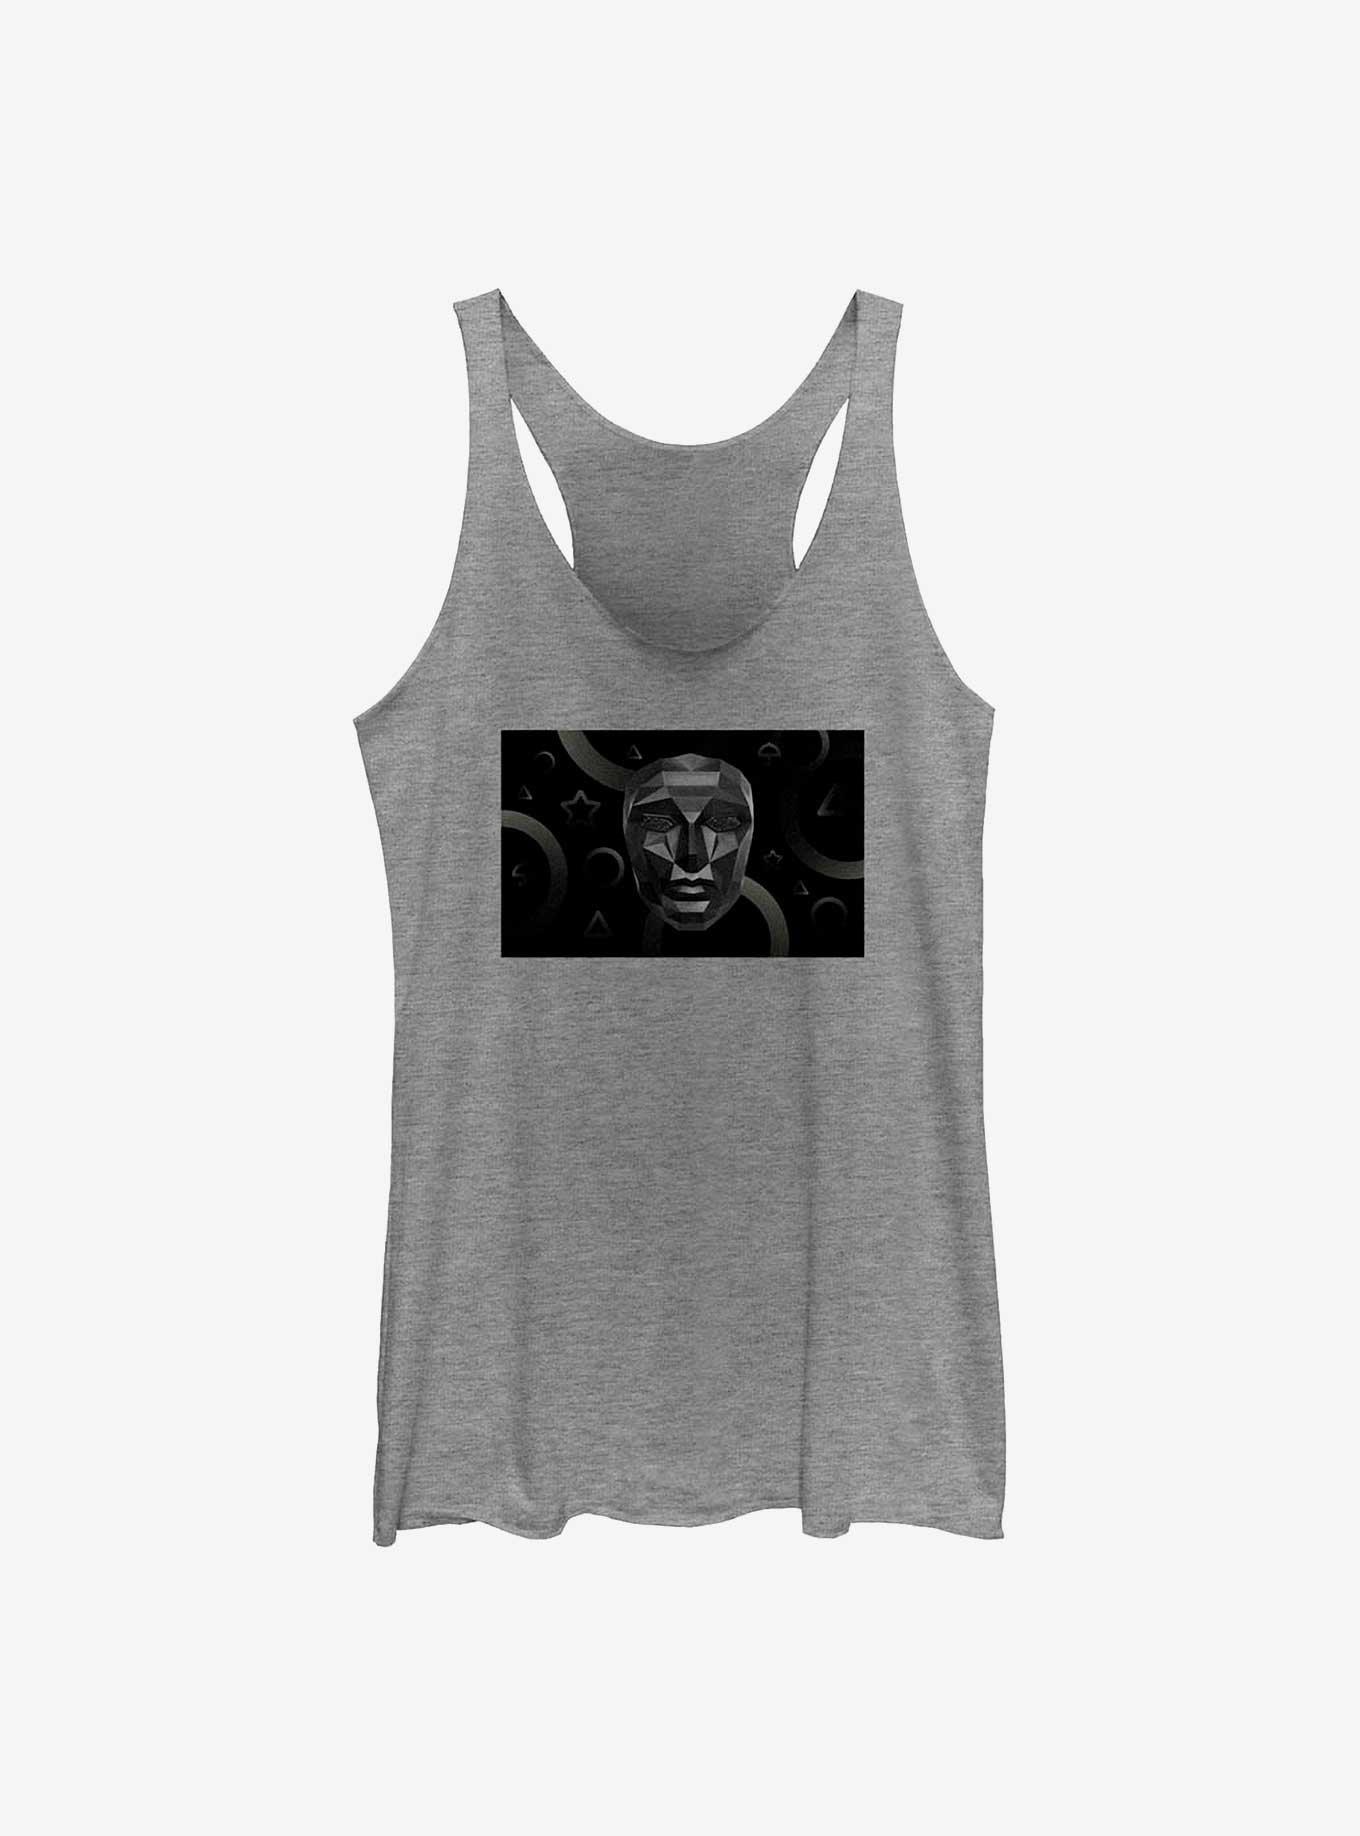 Squid Game Mask and Shapes Girls Tank, GRAY HTR, hi-res